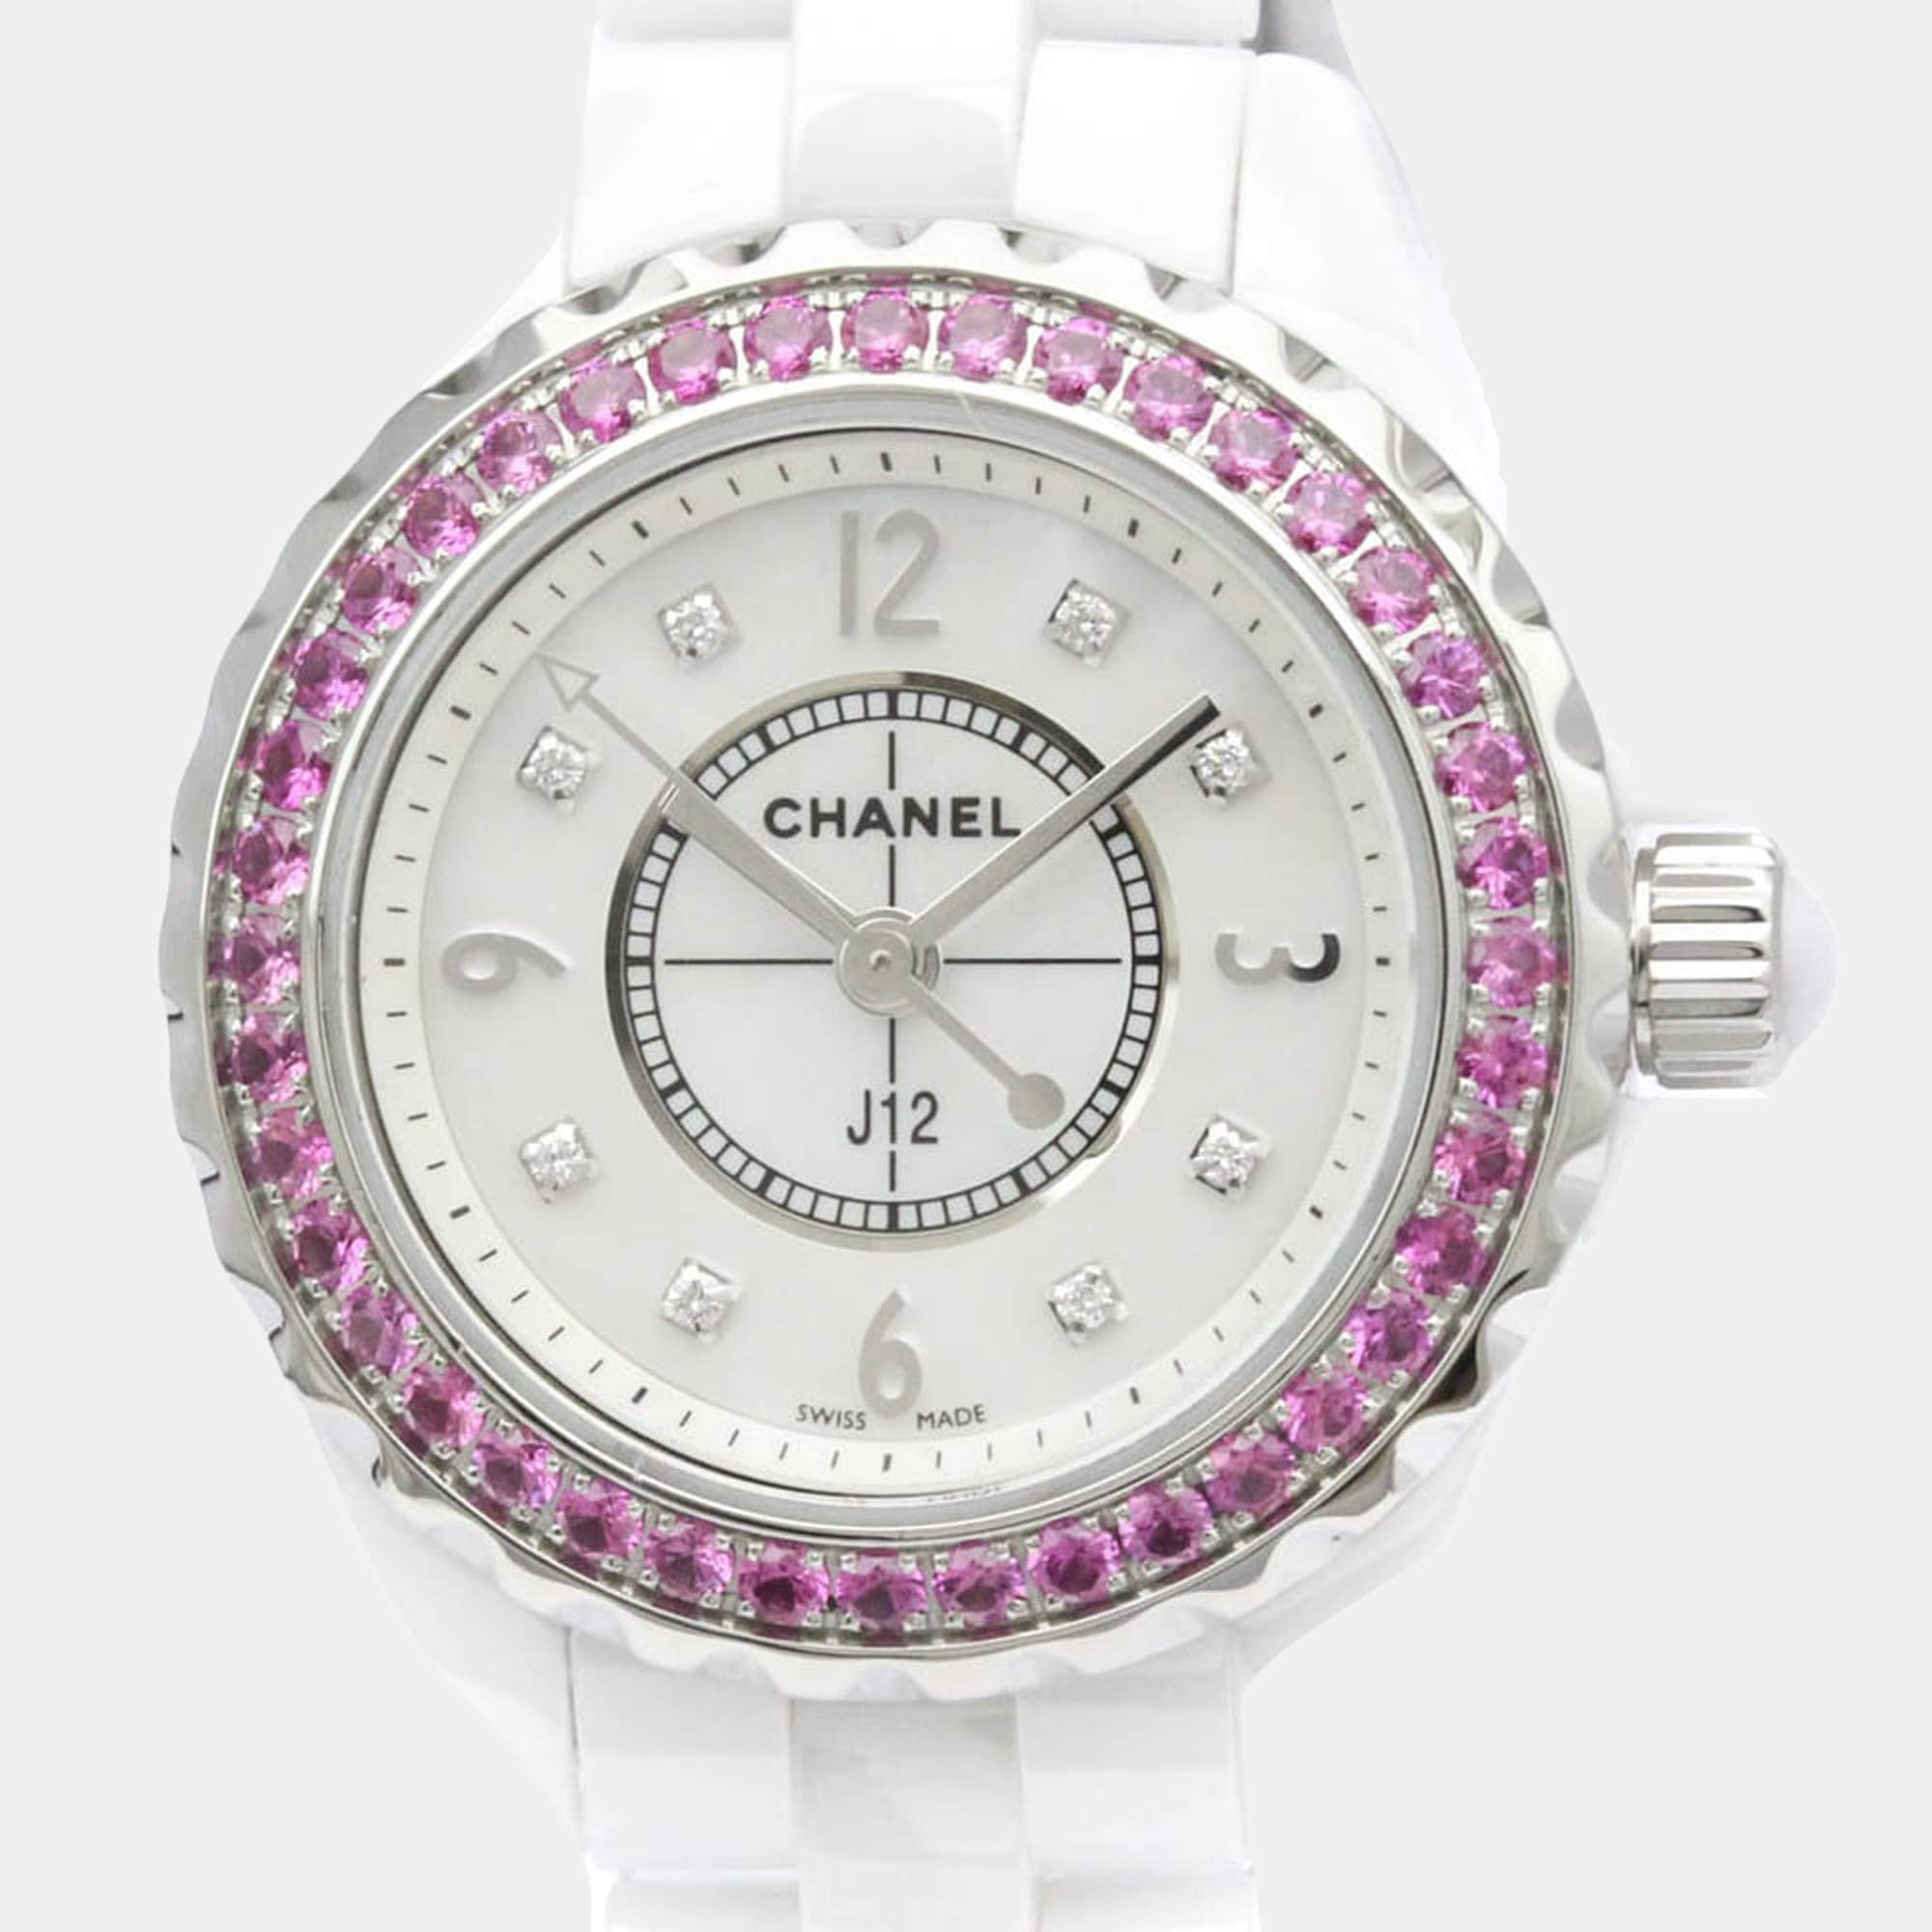 White Chanel J12 Watches - 12 For Sale on 1stDibs